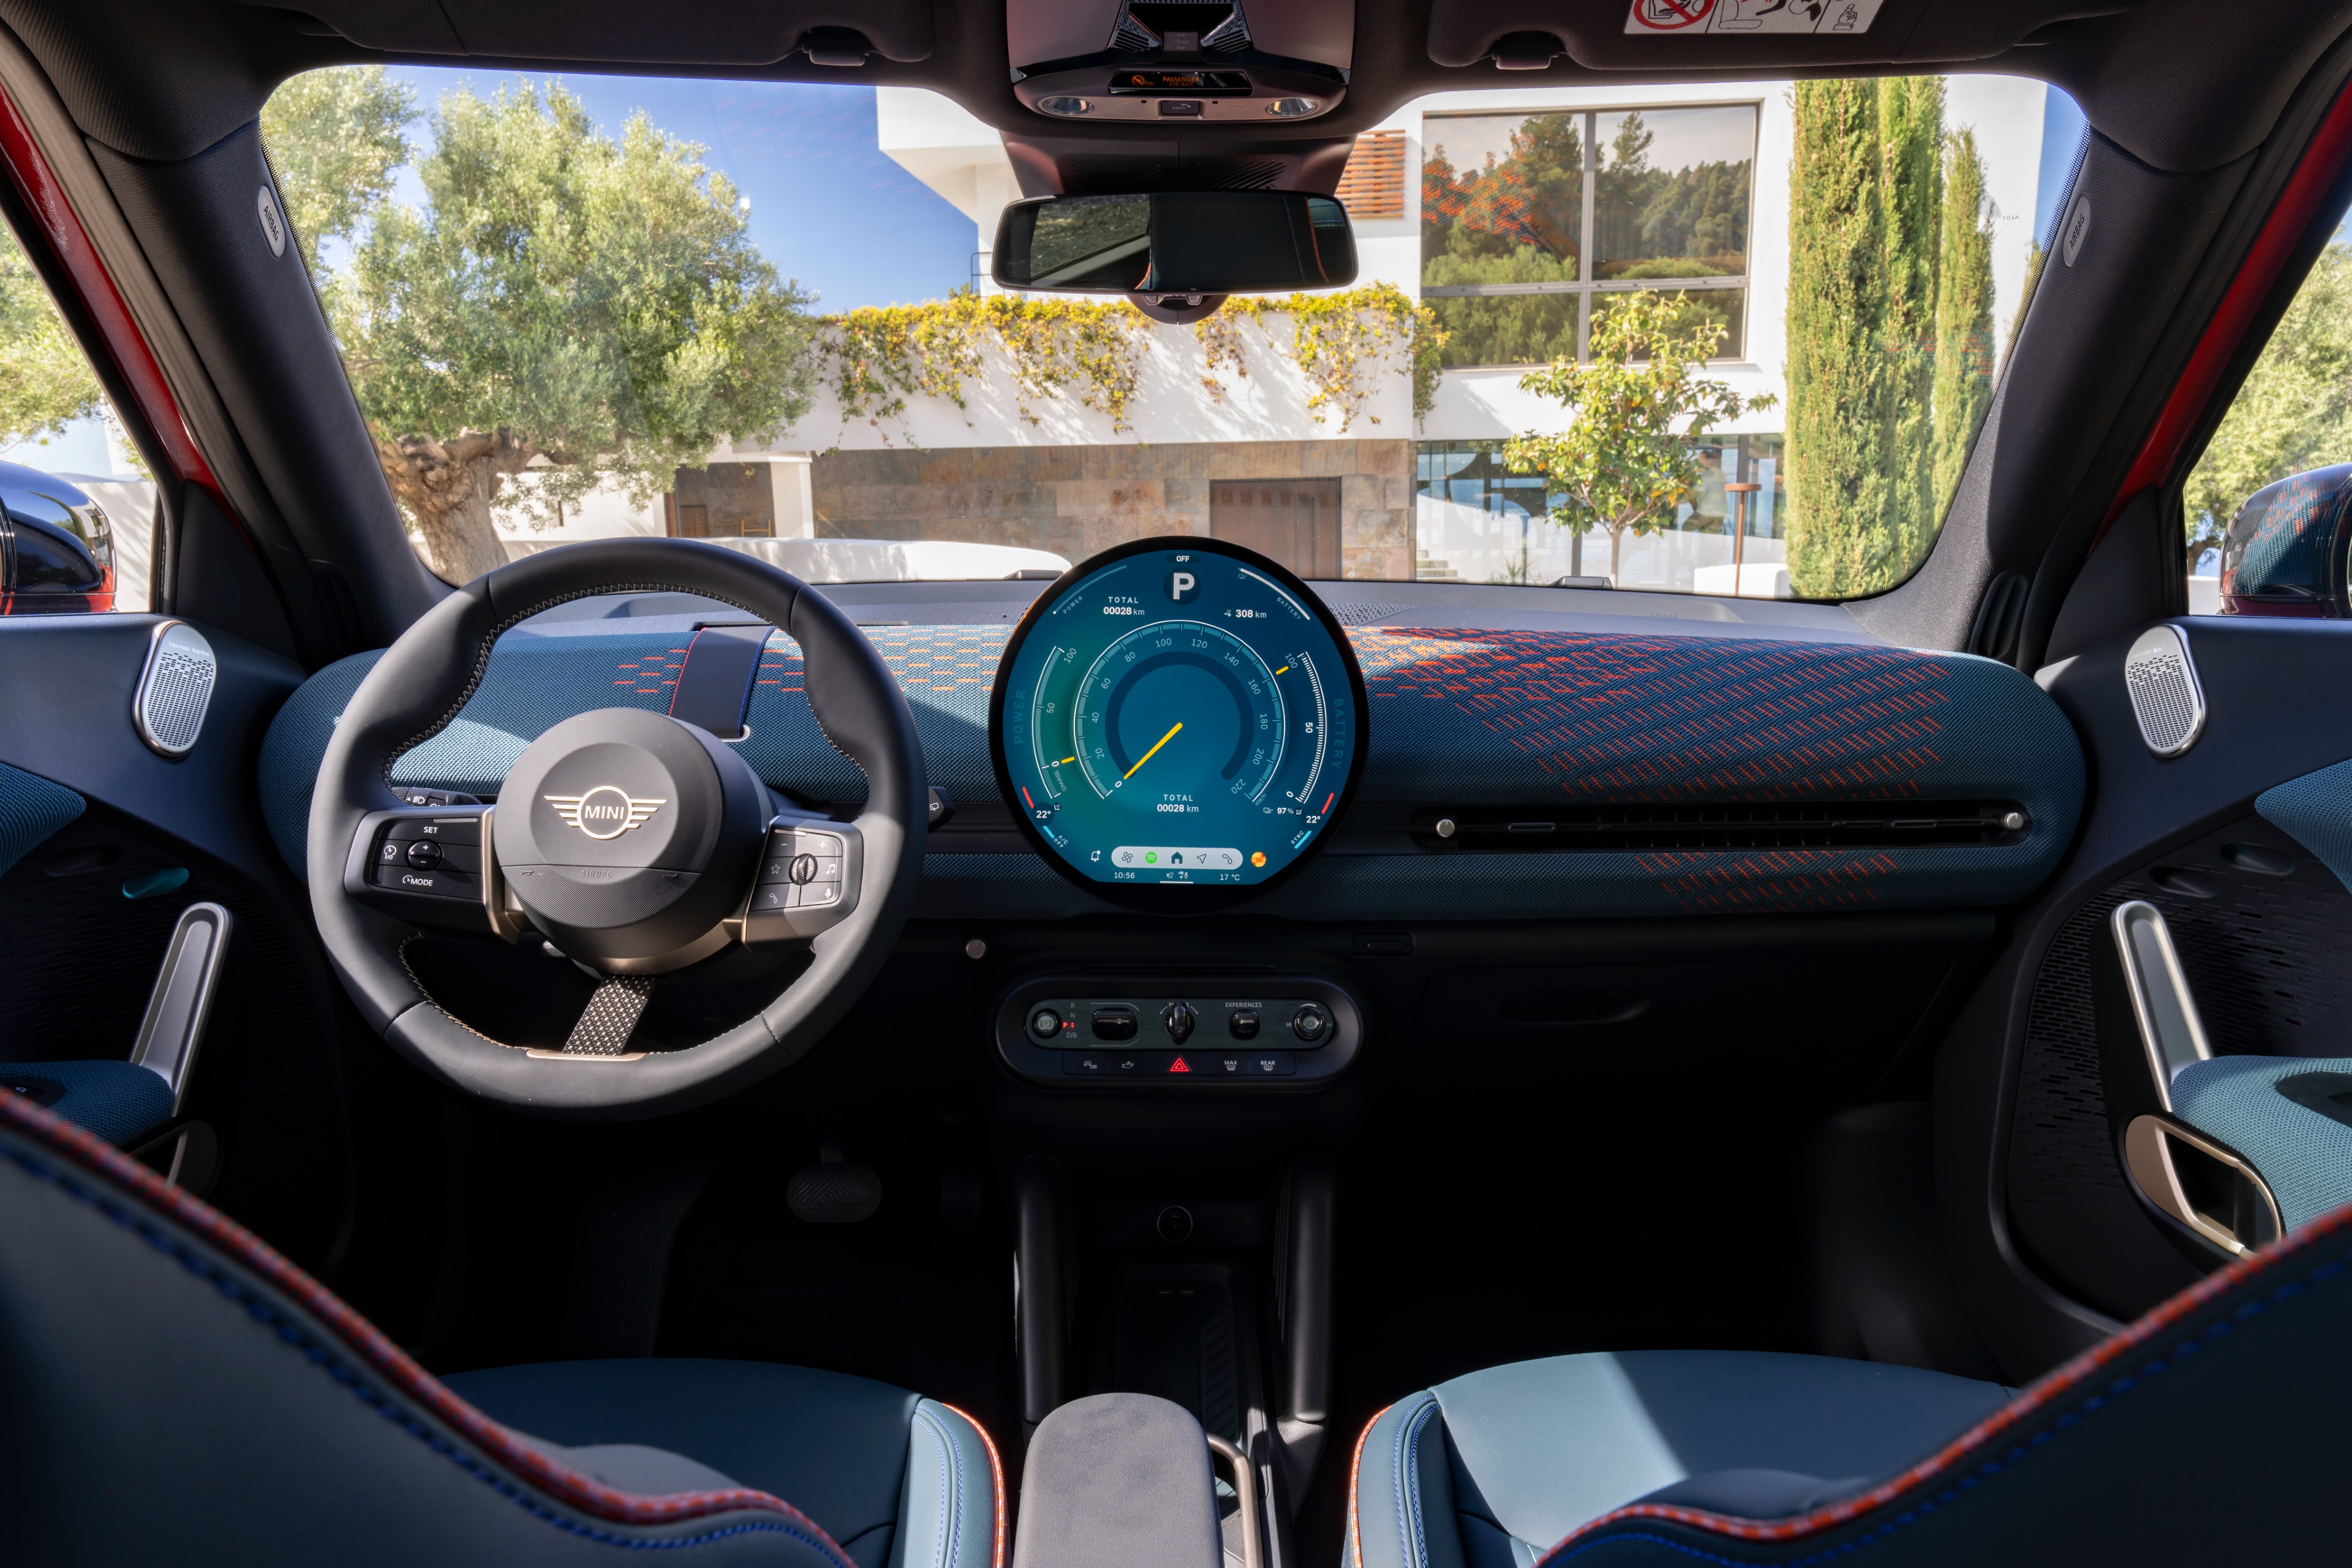 The cabin retains the funky MINI appearance complete with the circular infotainment system in the centre. The toggle switches have been retained for key functions